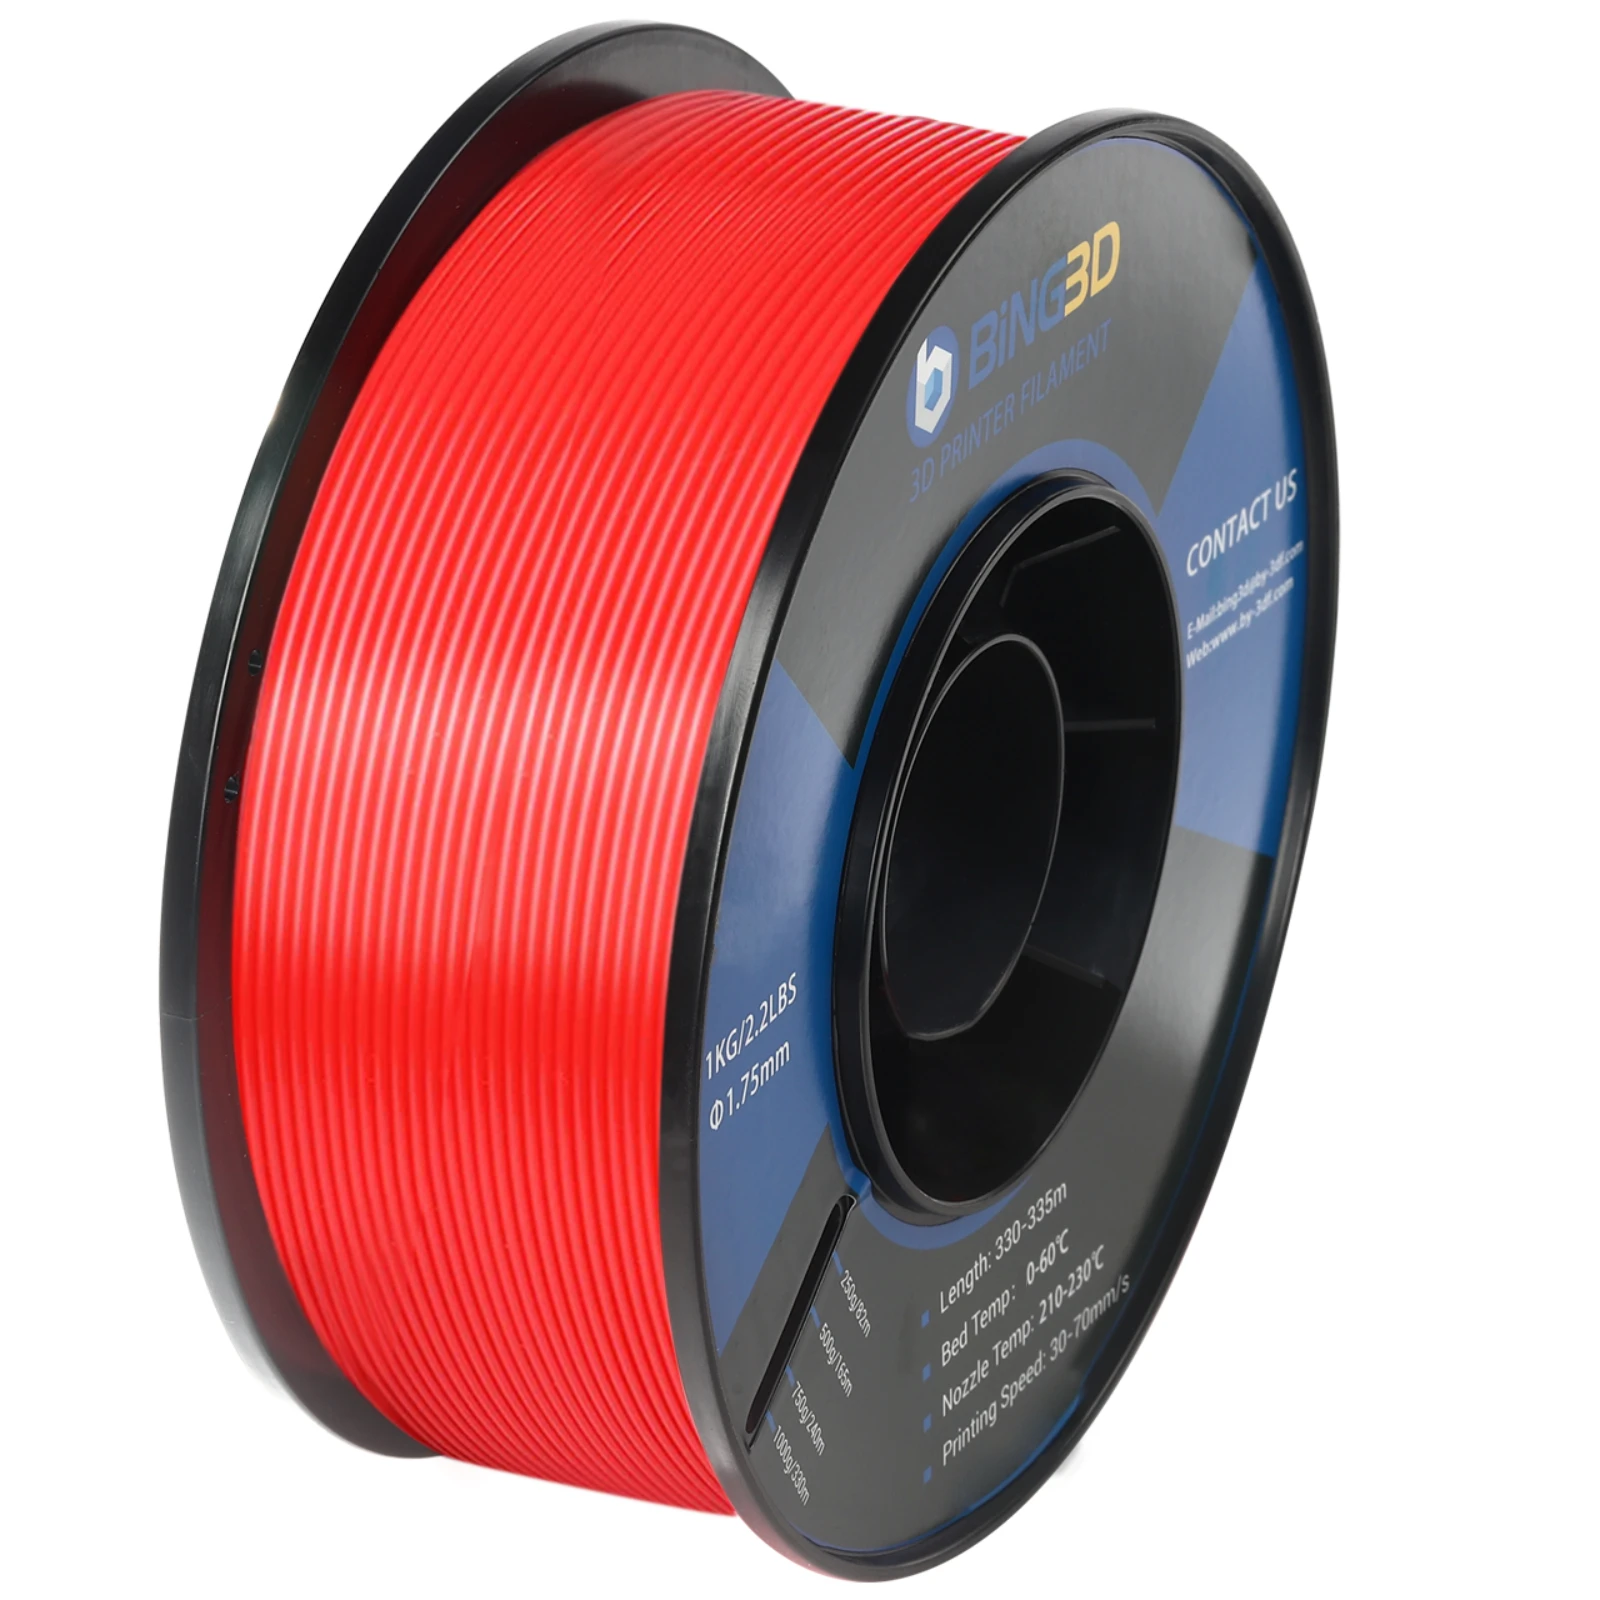 

Hot Selling 3D Printer PLA Filament, 1.75mm PLA-F Filament with Dimensional Accuracy +/- 0.03mm, 1kg Spool